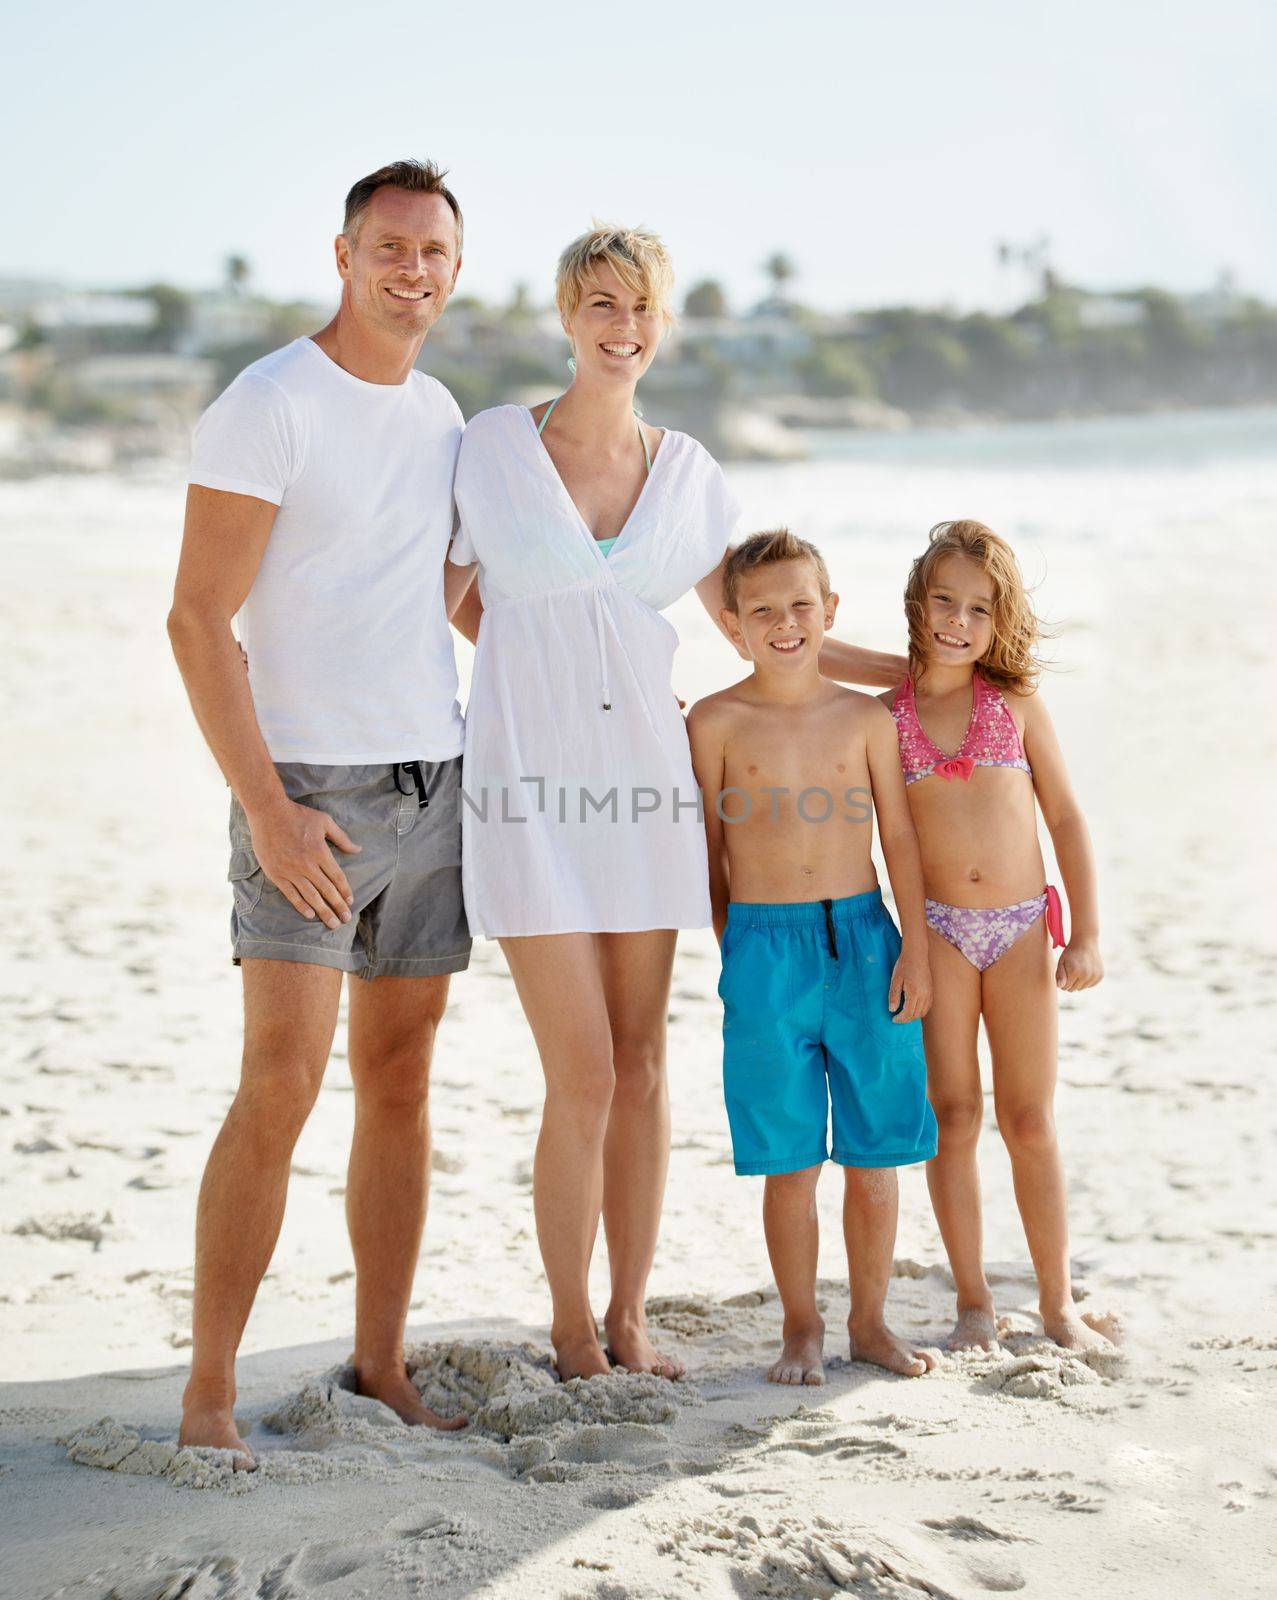 Every family deserves a great vacation. A happy young family standing on the beach while on vacation